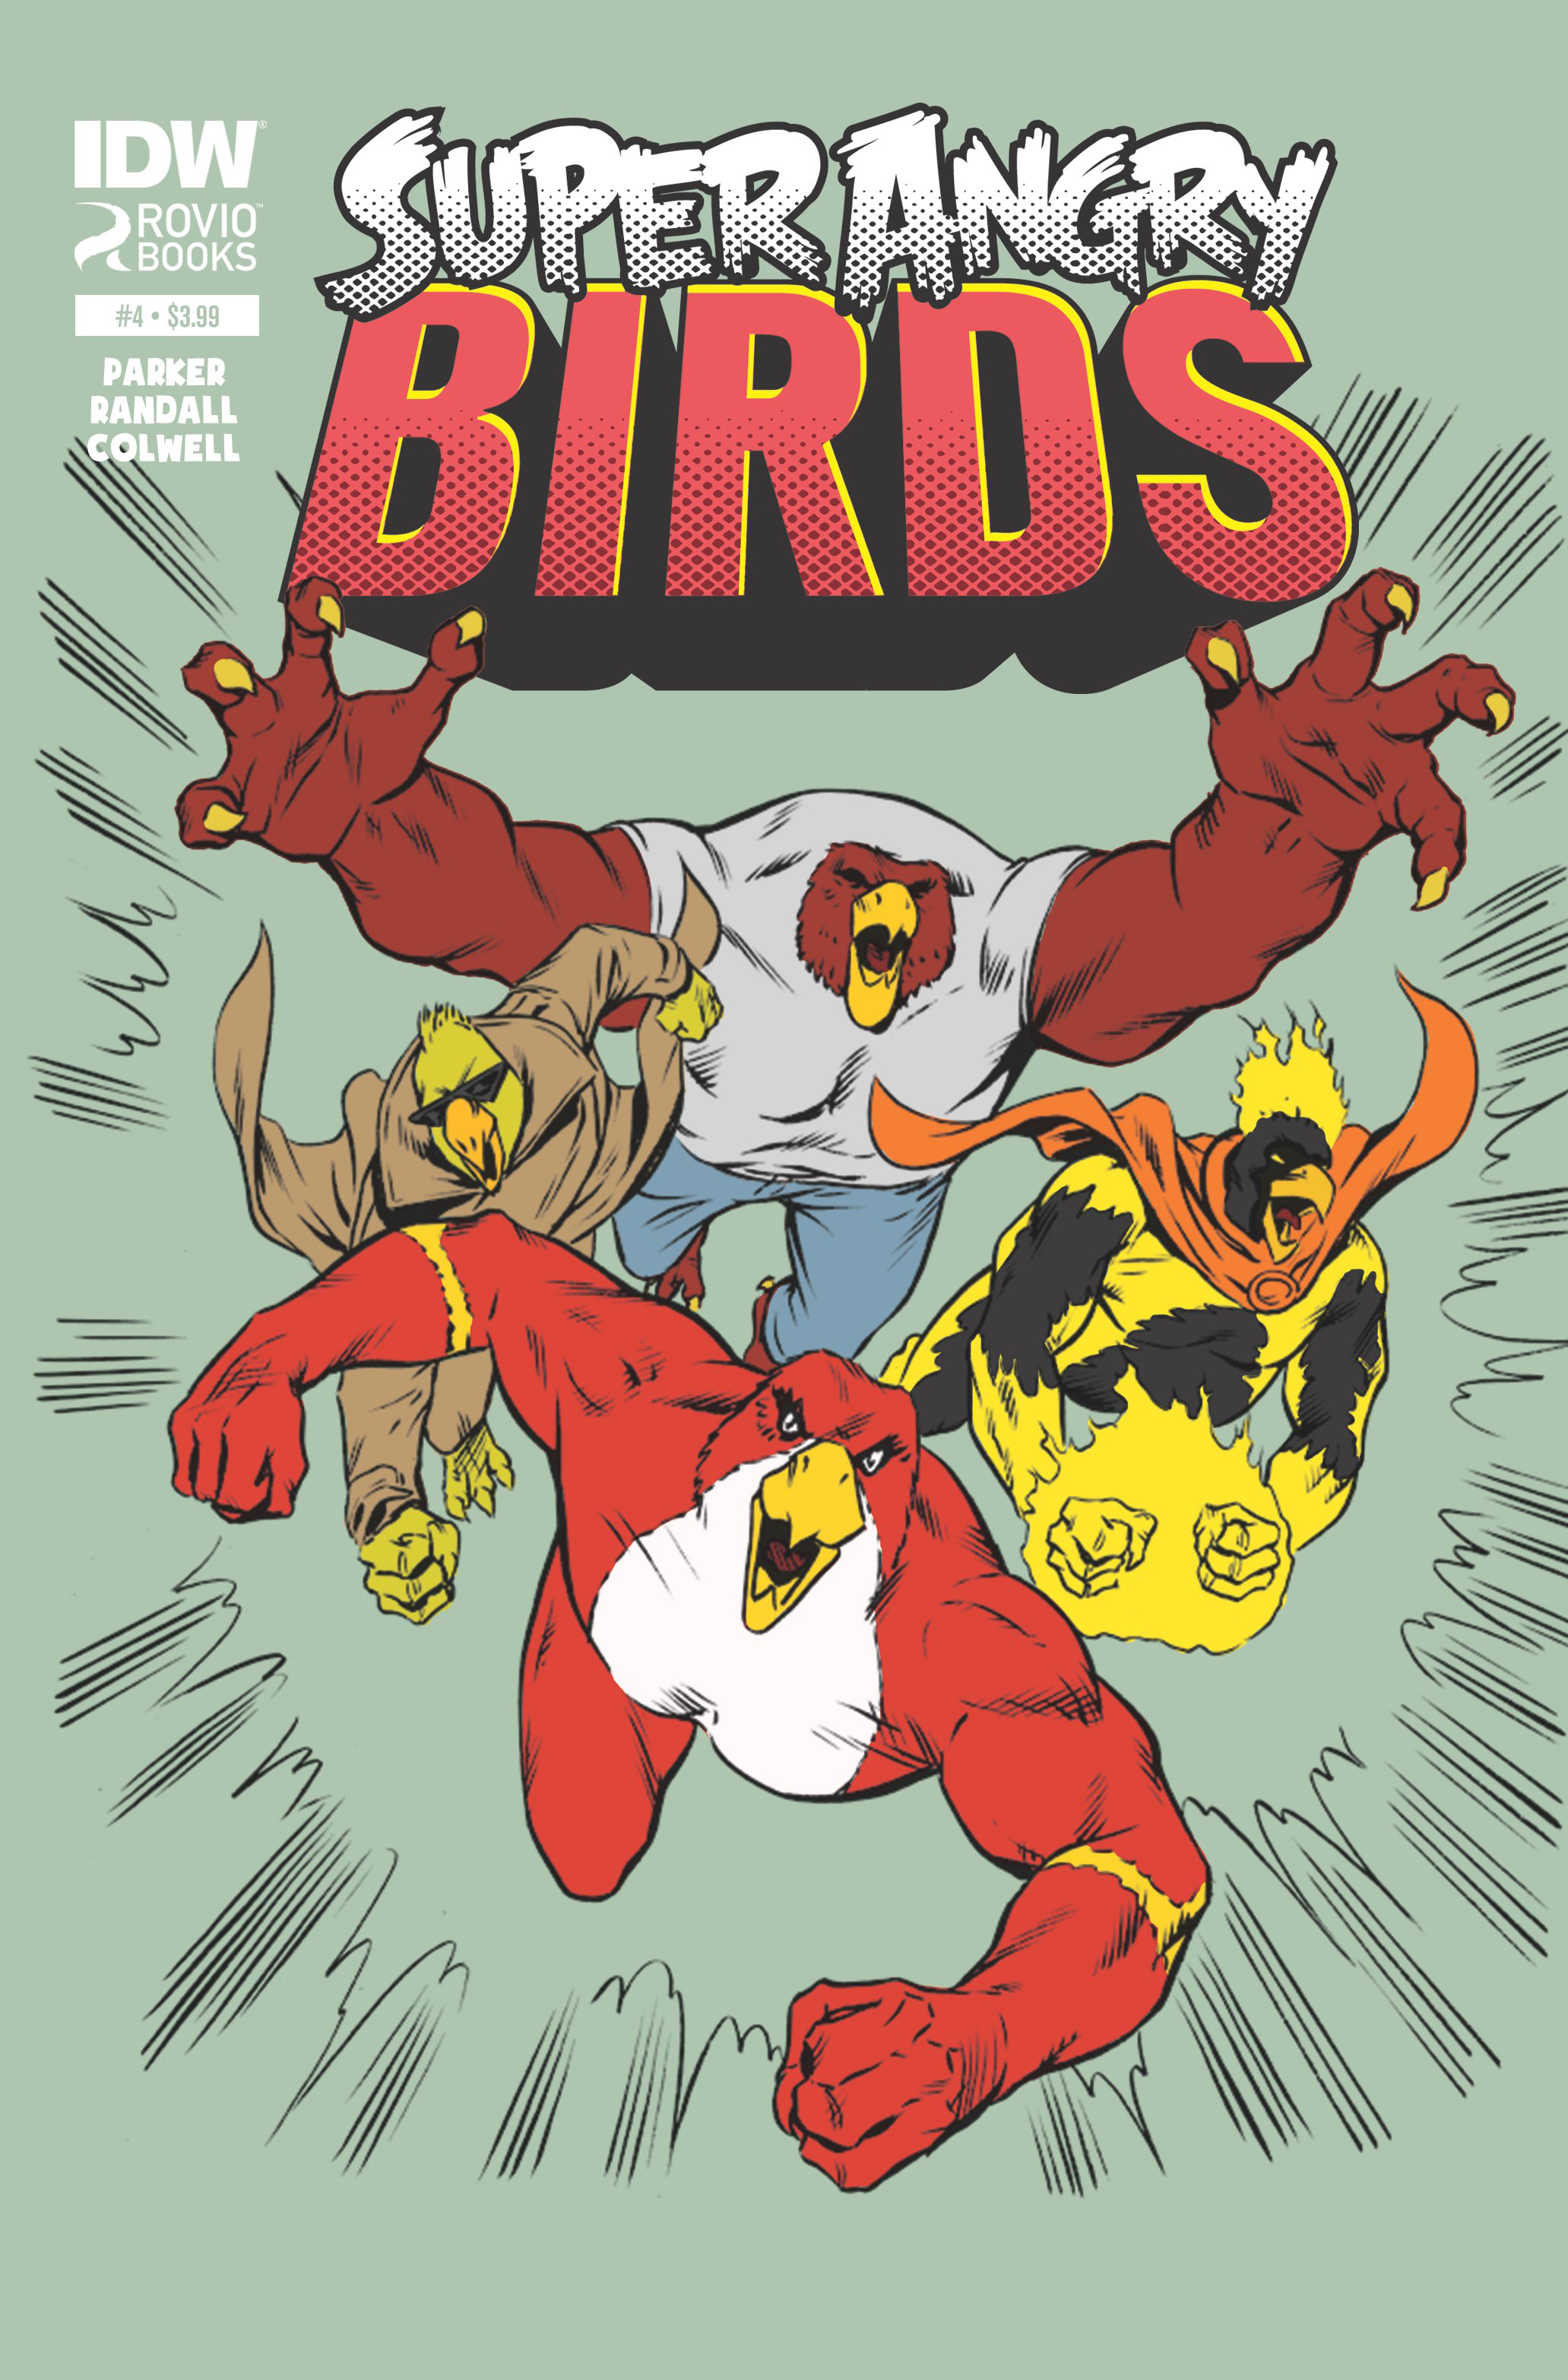 ANGRY BIRDS SUPER ANGRY BIRDS #4 (OF 4)